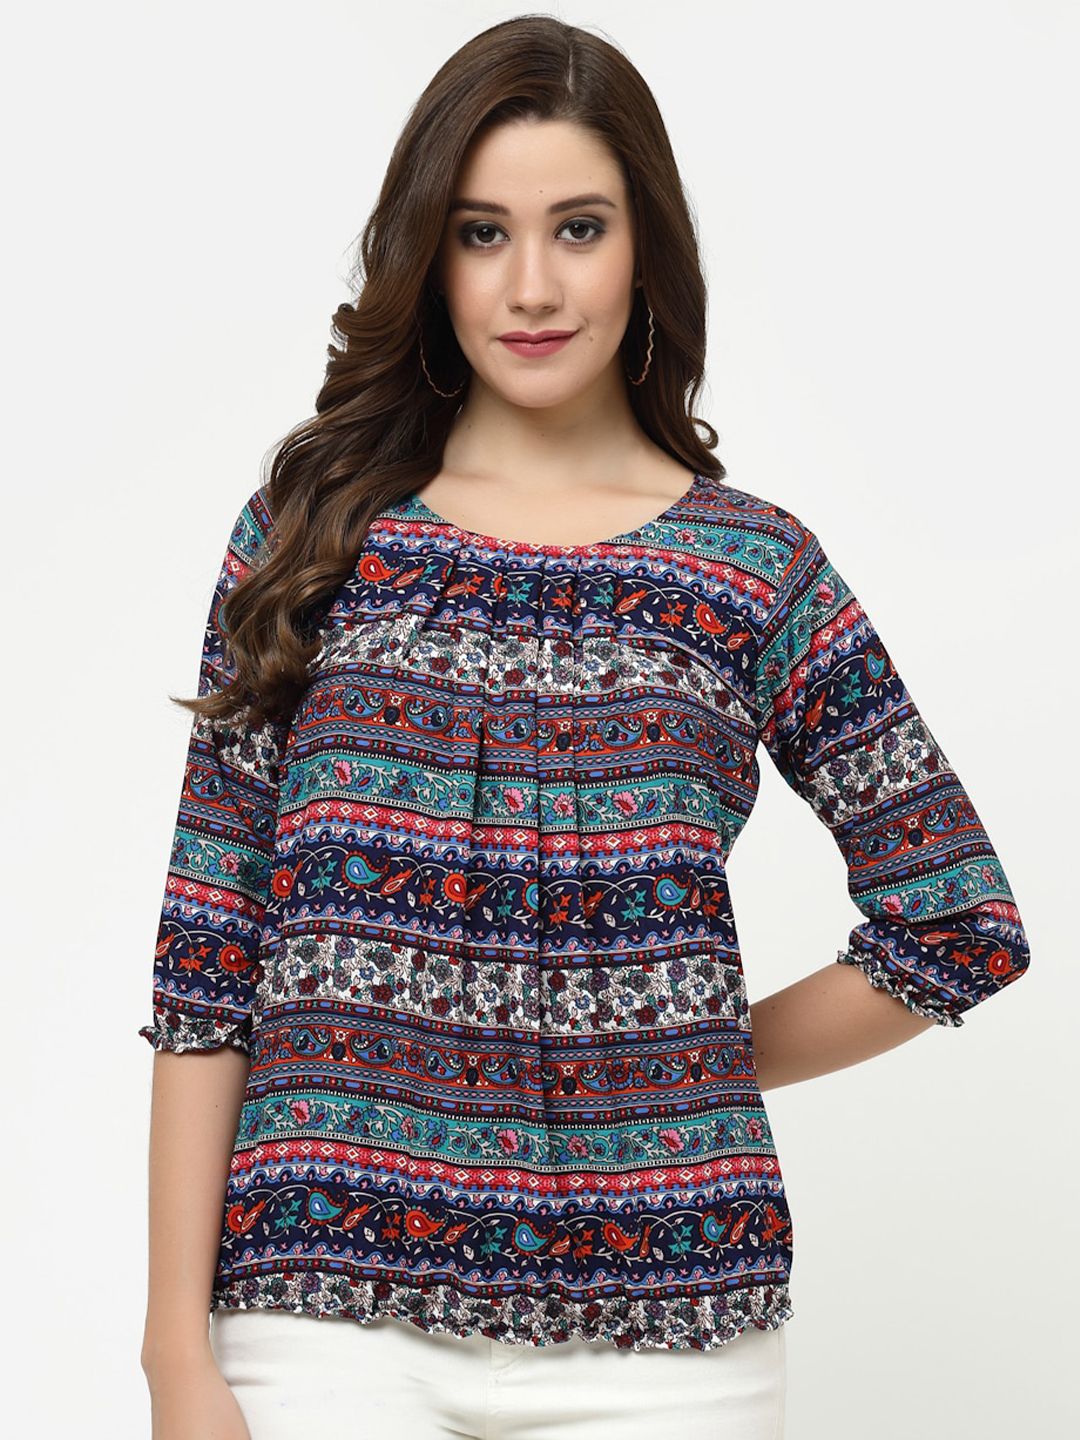 MISS AYSE Tribal Printed Crepe Round Neck Top Price in India